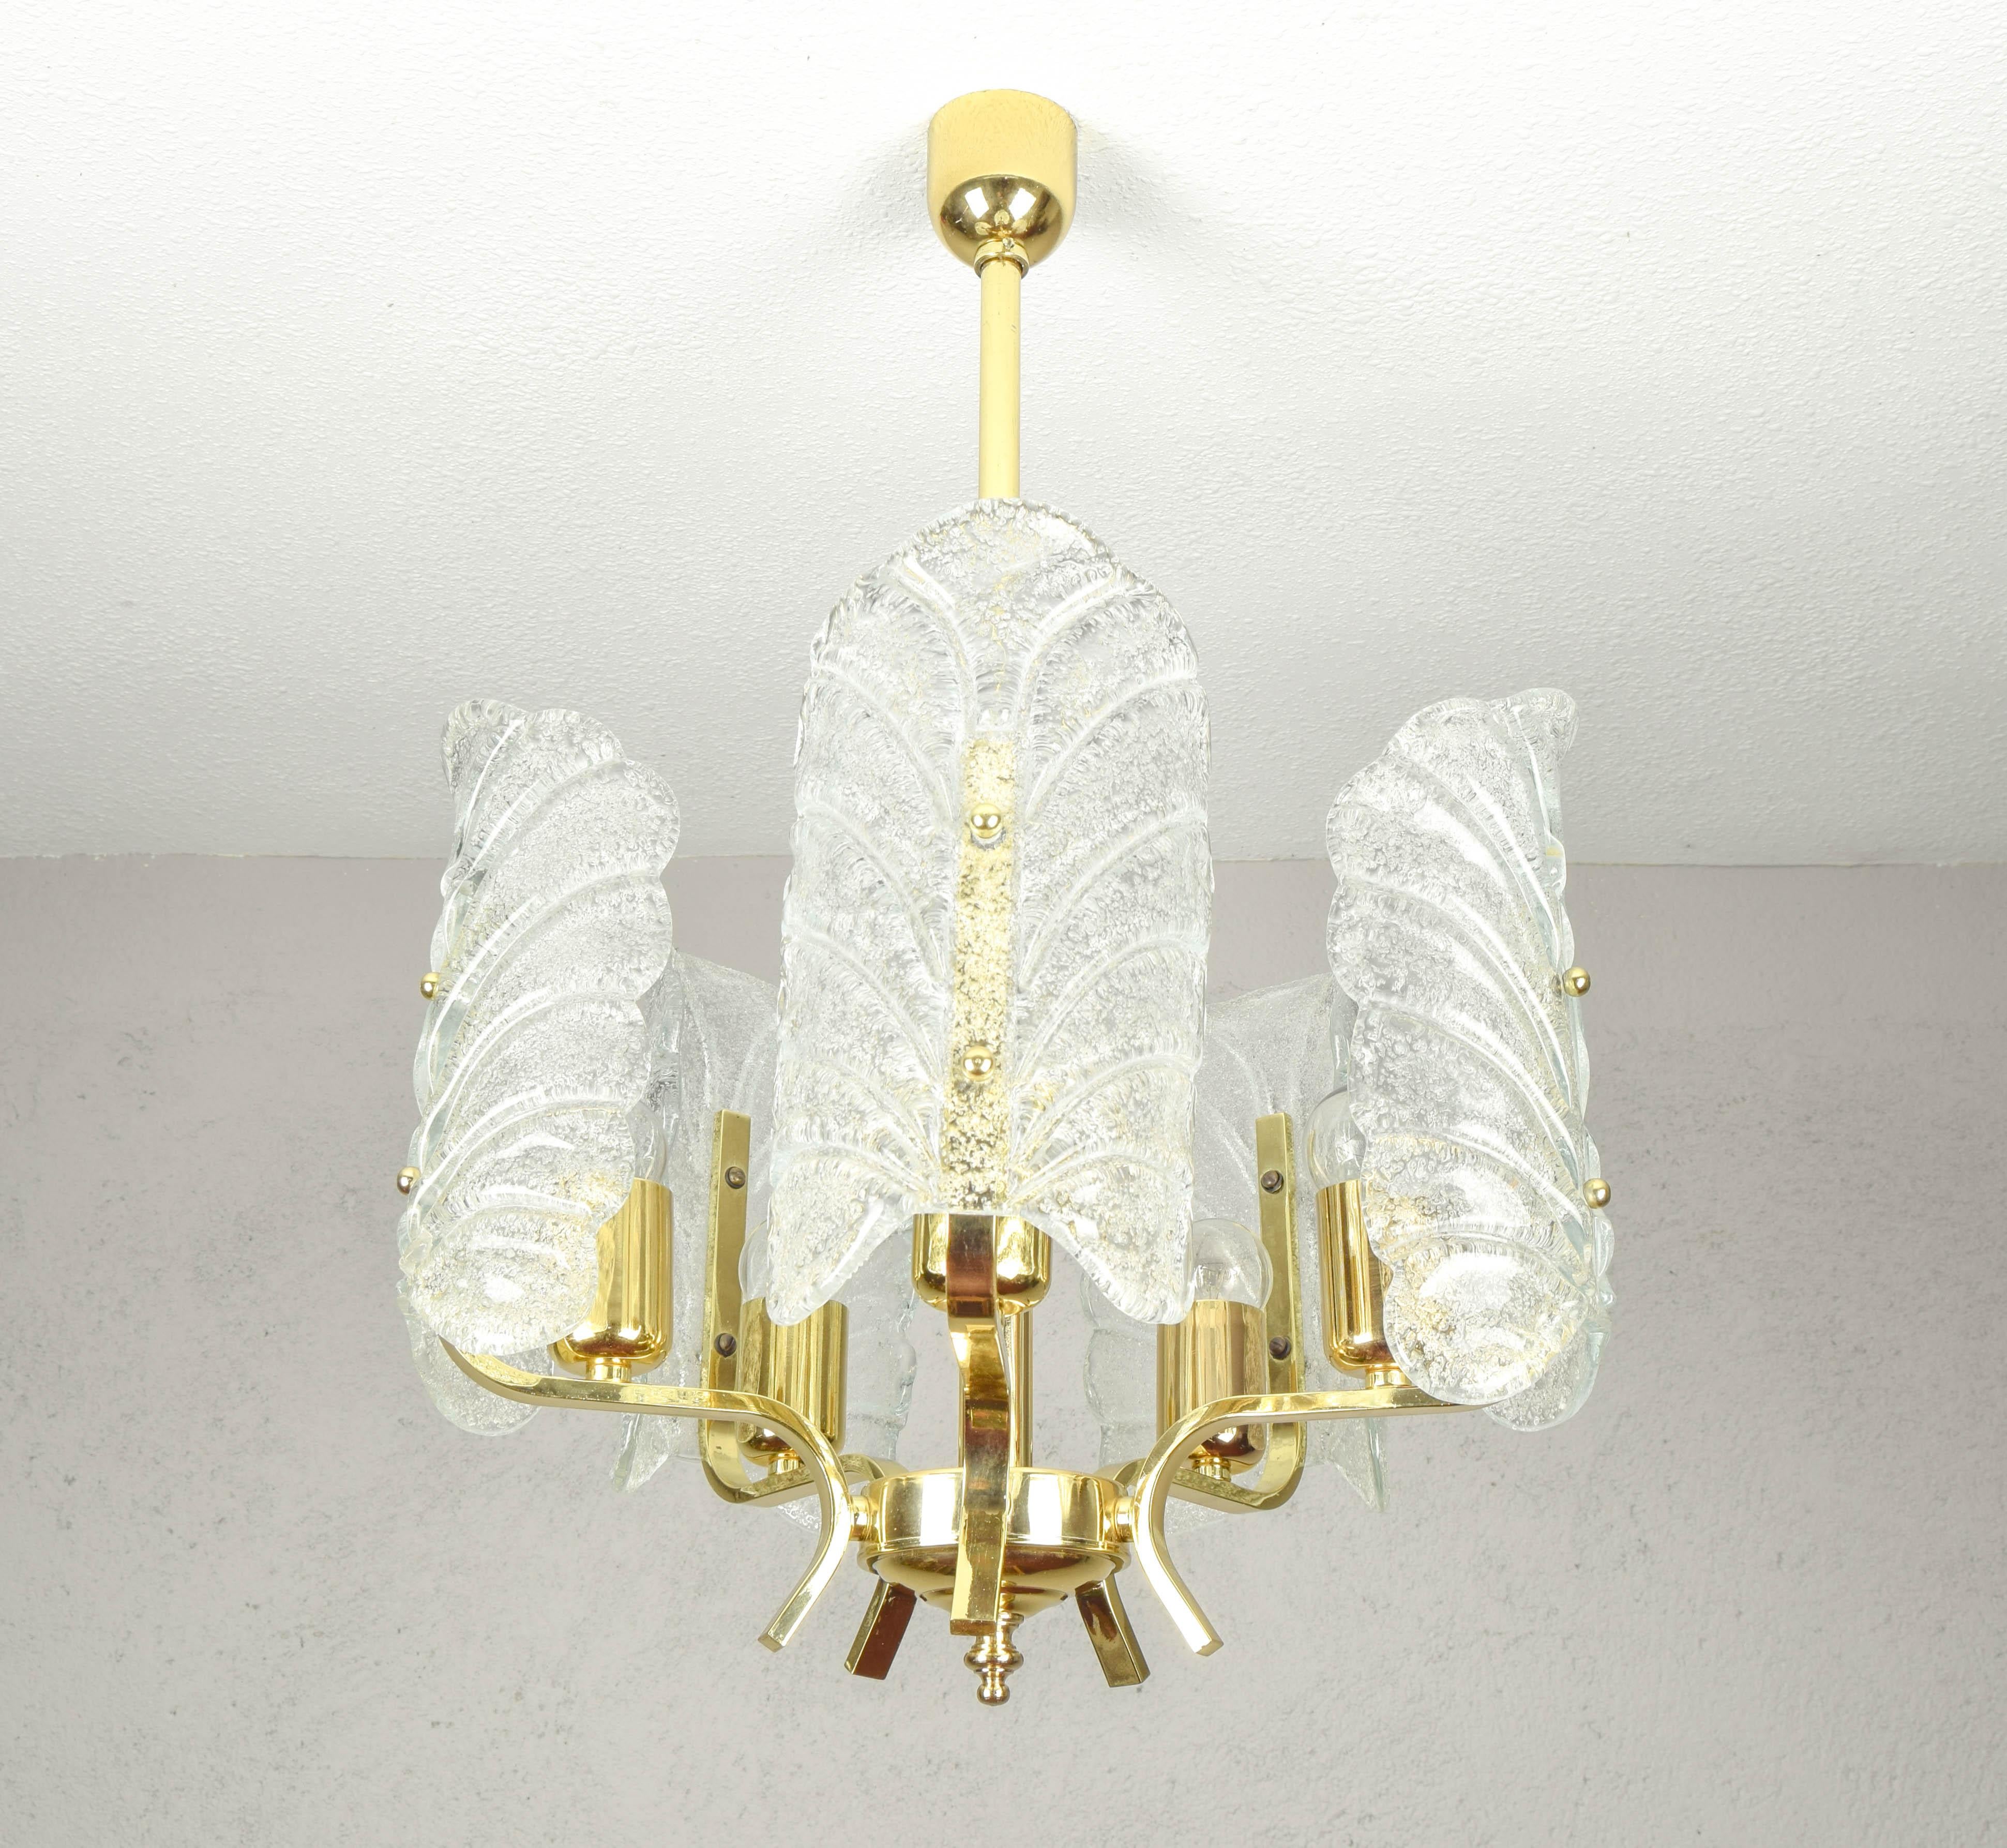 Carl Fagerlund chandelier for Orreford, Sweden.
Piece composed of a brass-plated steel body with five arms, five light points with an E27 socket and five sheets of acid-etched glass, which in turn contain tiny embedded crystals.
The condition of